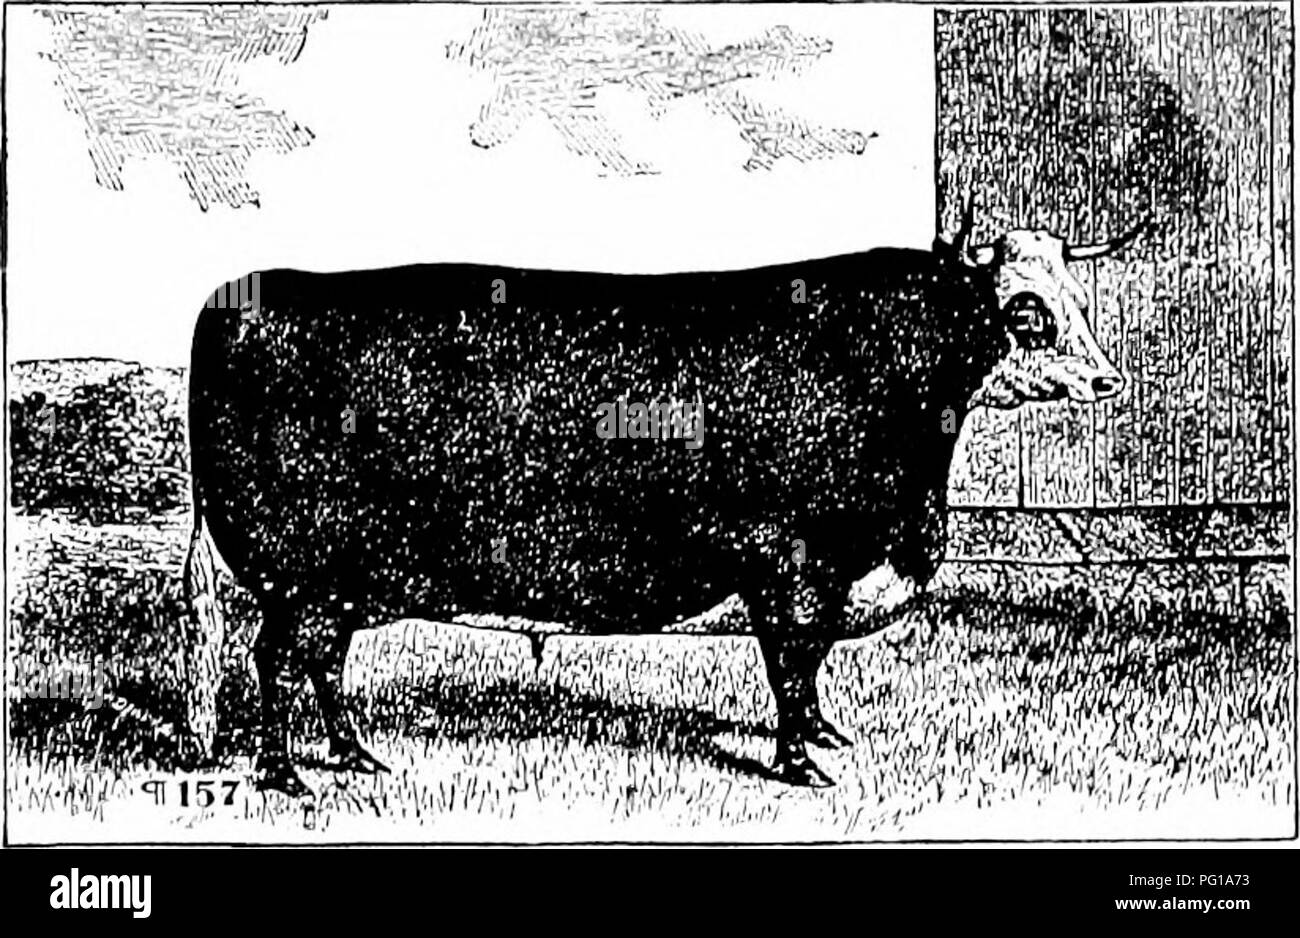 . History of Hereford cattle : proven conclusively the oldest of improved breeds . Hereford cattle. 204 HIST 0 H Y OF HE REFORD C A T T L E schemes to enabli' liim to back out made him querulous. He wrote to tlie &quot;Mark Lane Ex- press&quot; that he had a great aversion to gambling ; aavanced this as a plea, notwithstanding he had been showing for money exactly on the same principle. Bates' friends became alarmed ; rode over to Kirklevington to inquire if that plea of gamb- ling was the only reason ; others wrote with anx- ious inquiries. Bates, in his perplexity, seemed to be wandering abo Stock Photo